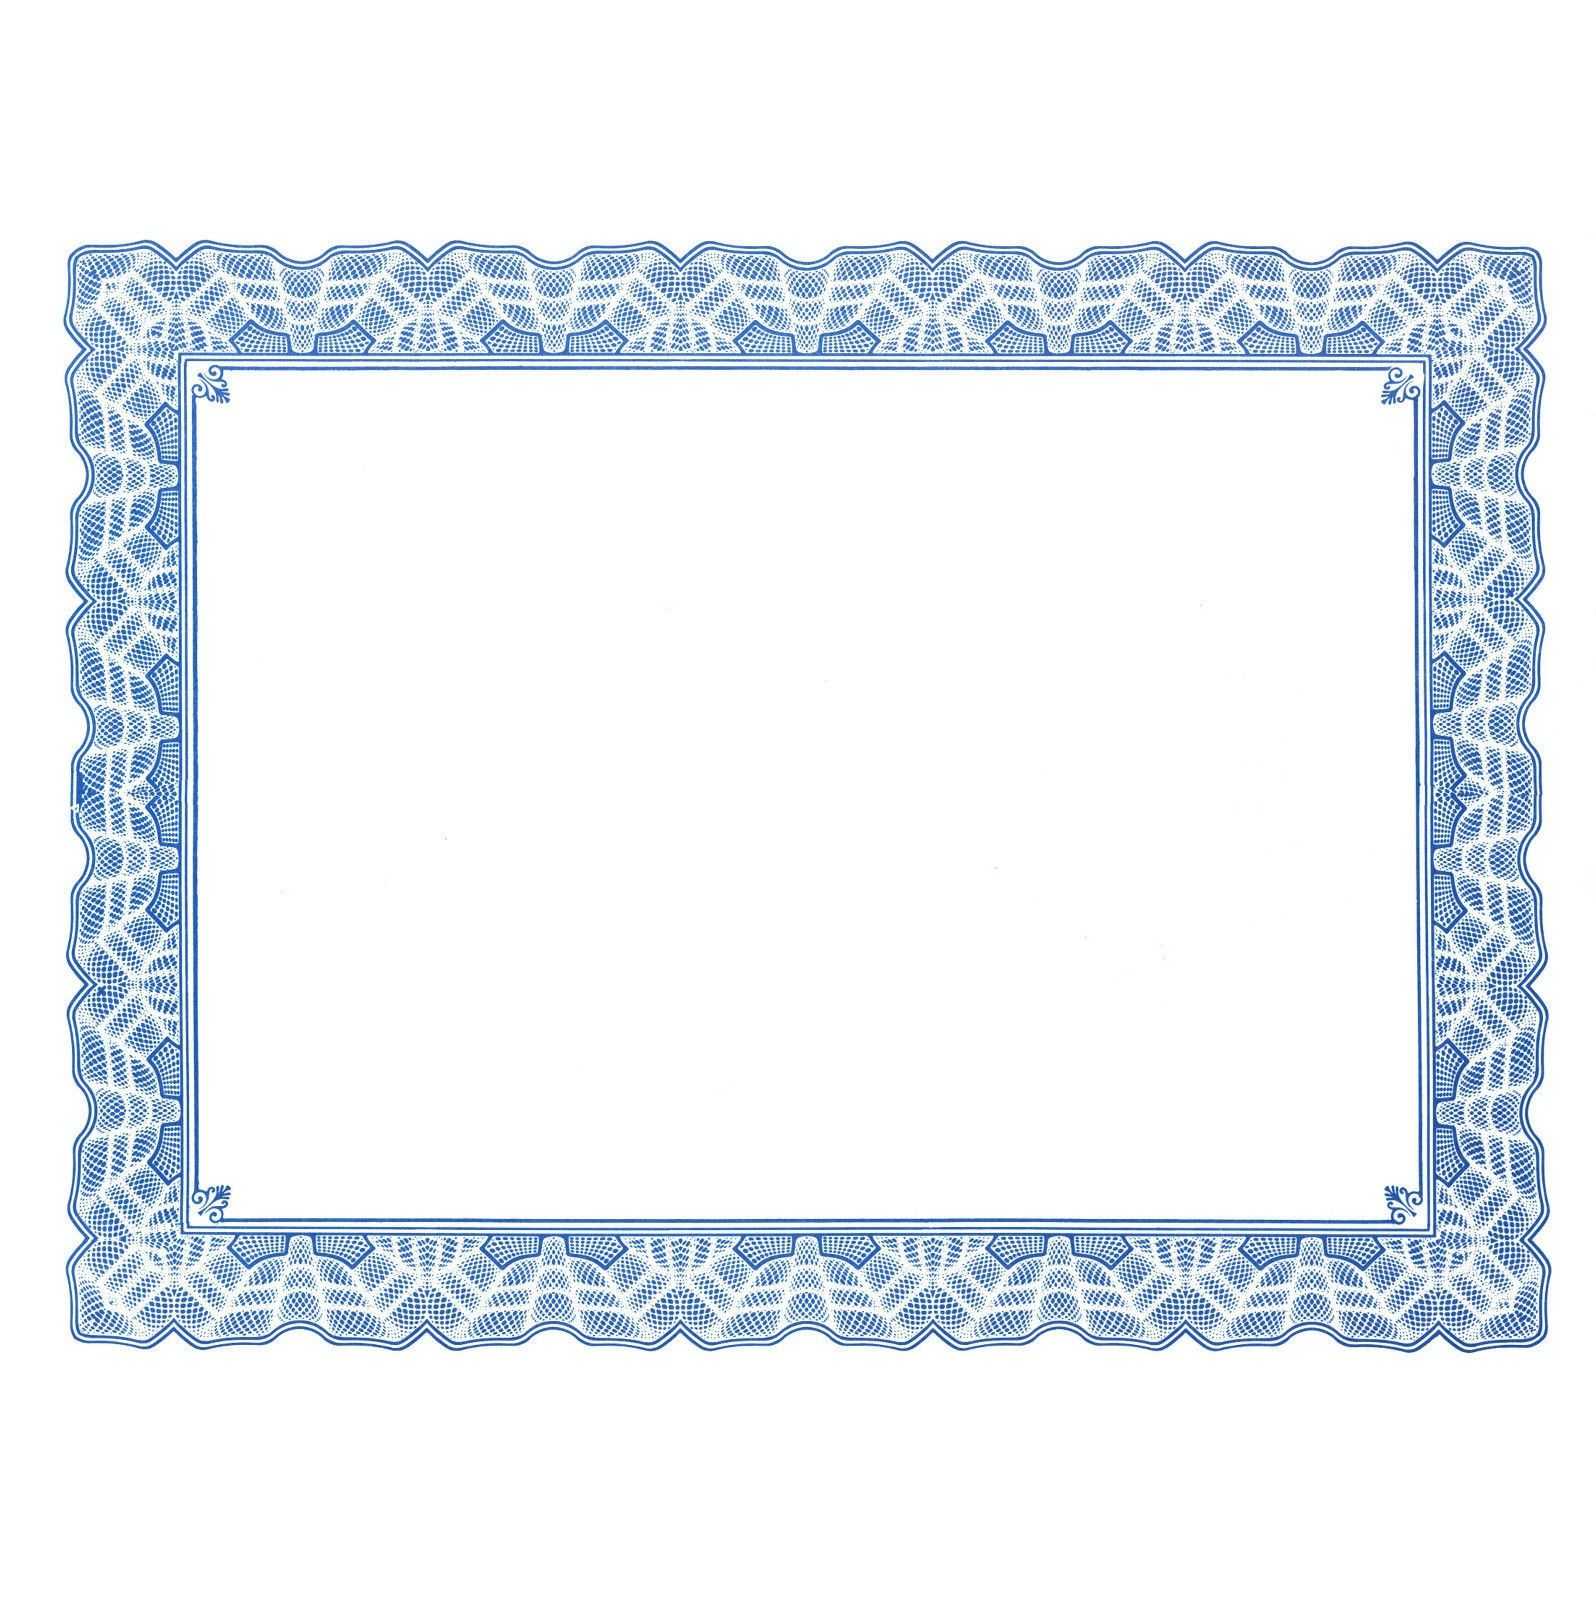 Free Certificate Border Templates For Word Within Free Certificate Templates For Word 2007